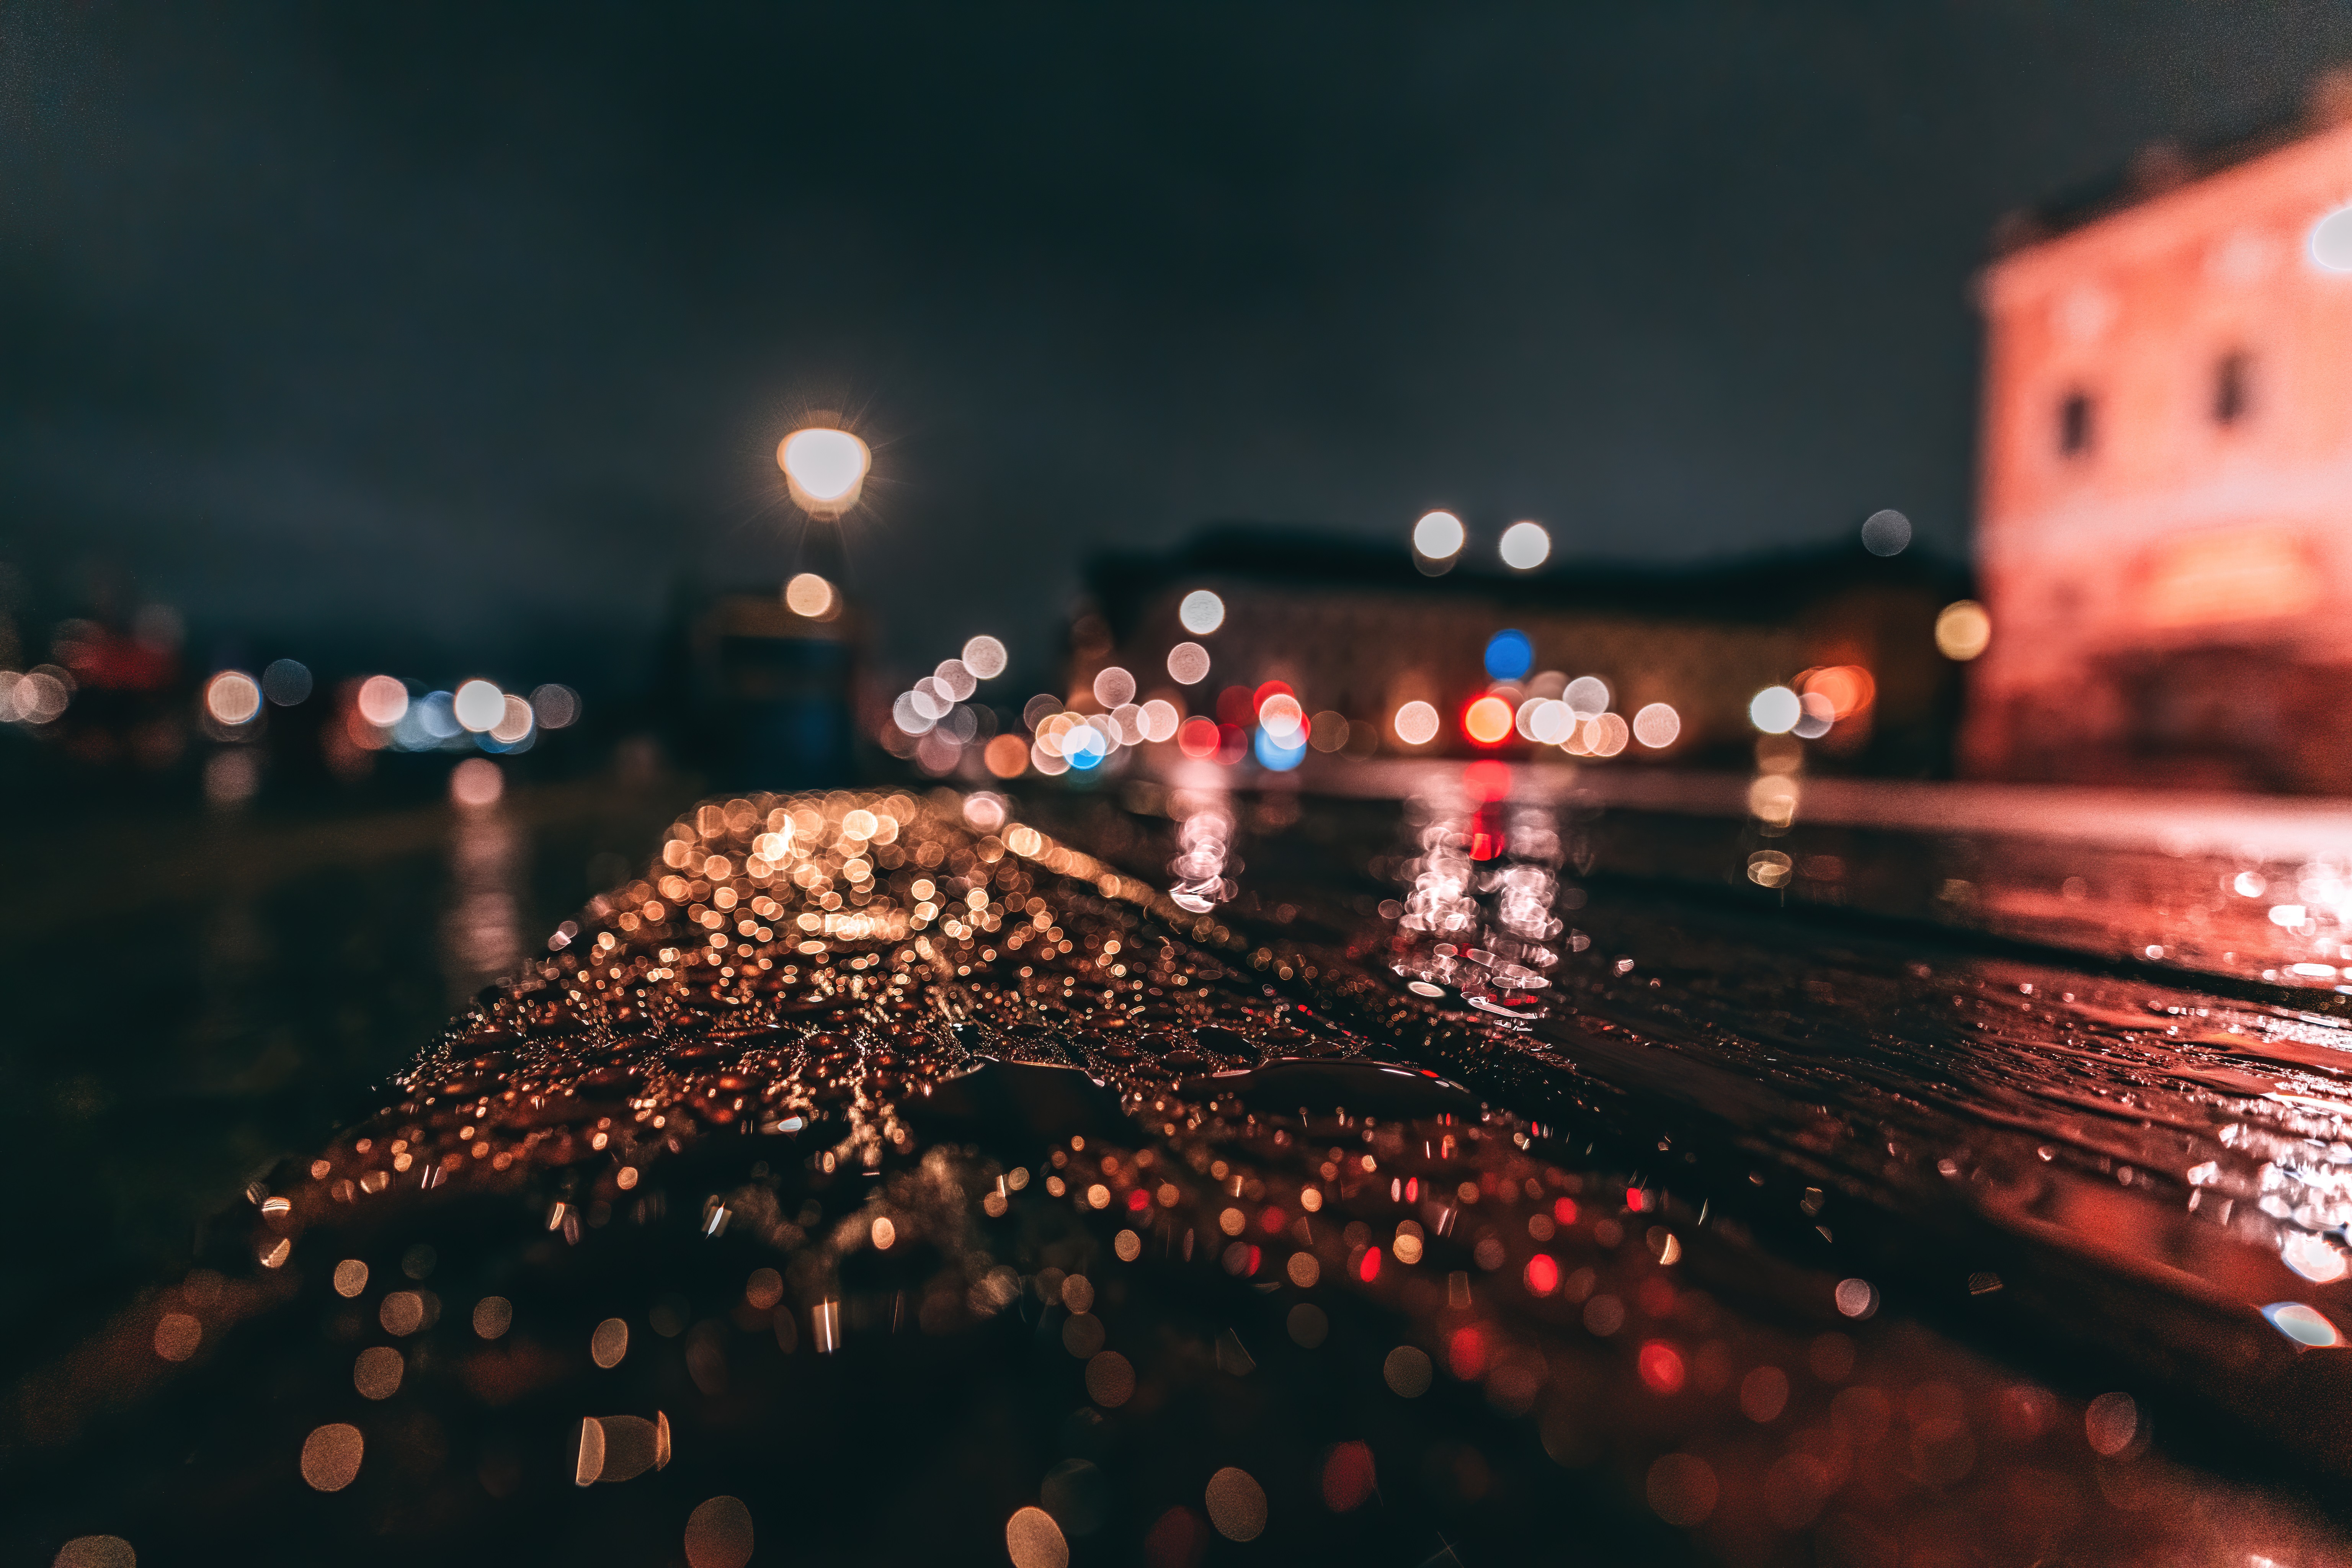 depth of field, town, wet, bench, water drops, photography, night, lights,  blurred | 6144x4096 Wallpaper 